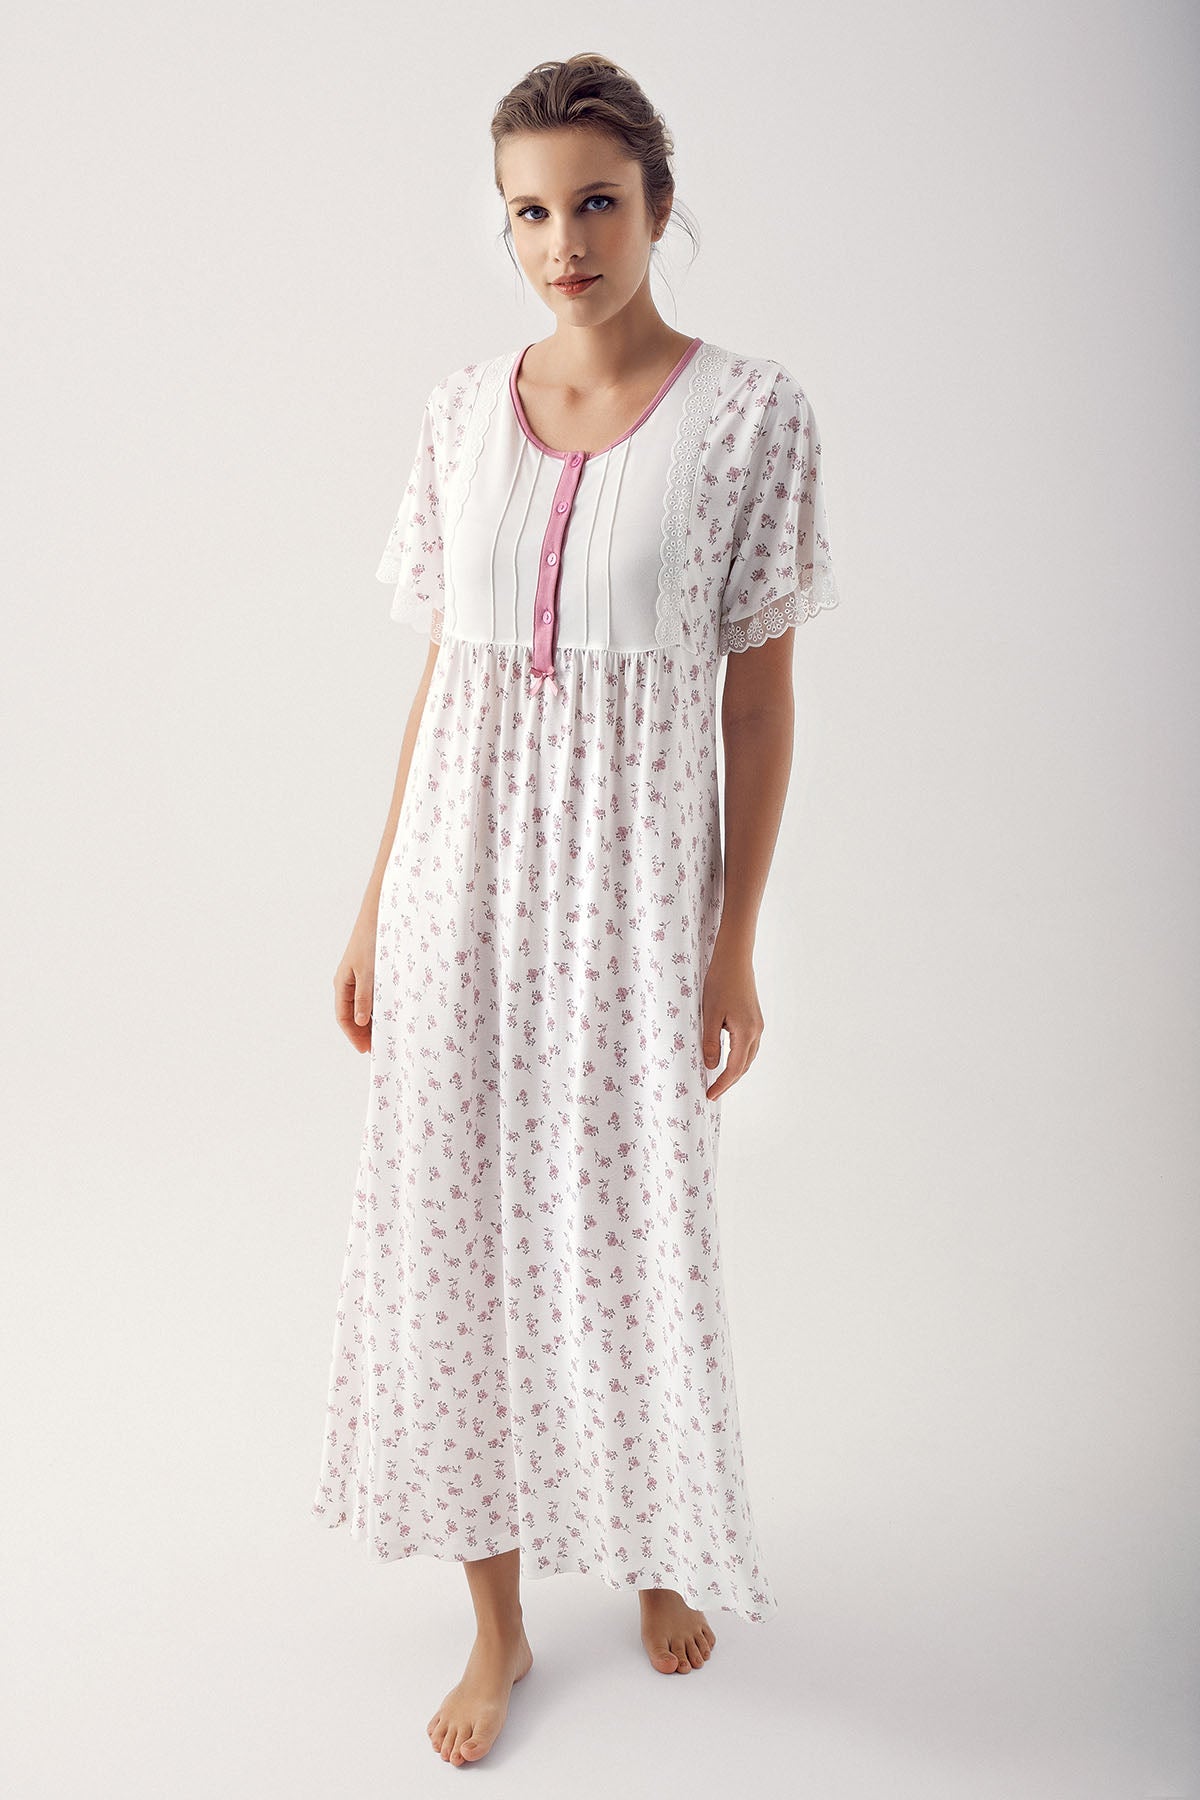 Shopymommy 14113 Flower Pattern Lace Plus Size Maternity & Nursing Nightgown Dried Rose